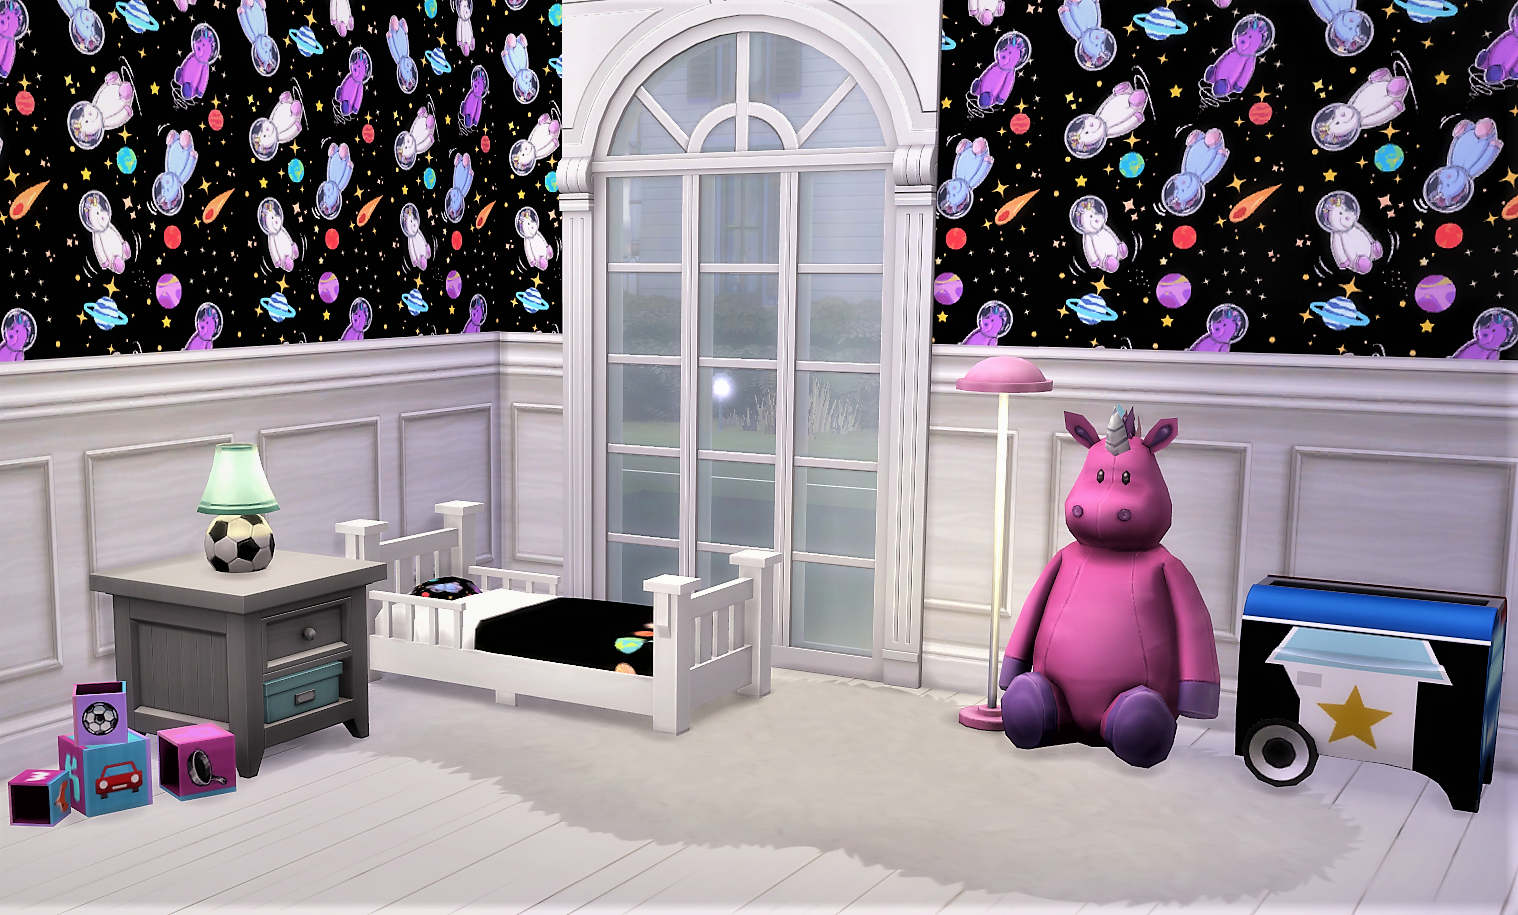 Comfy Space🤍☁️ - The Sims 4 Build / Buy - CurseForge